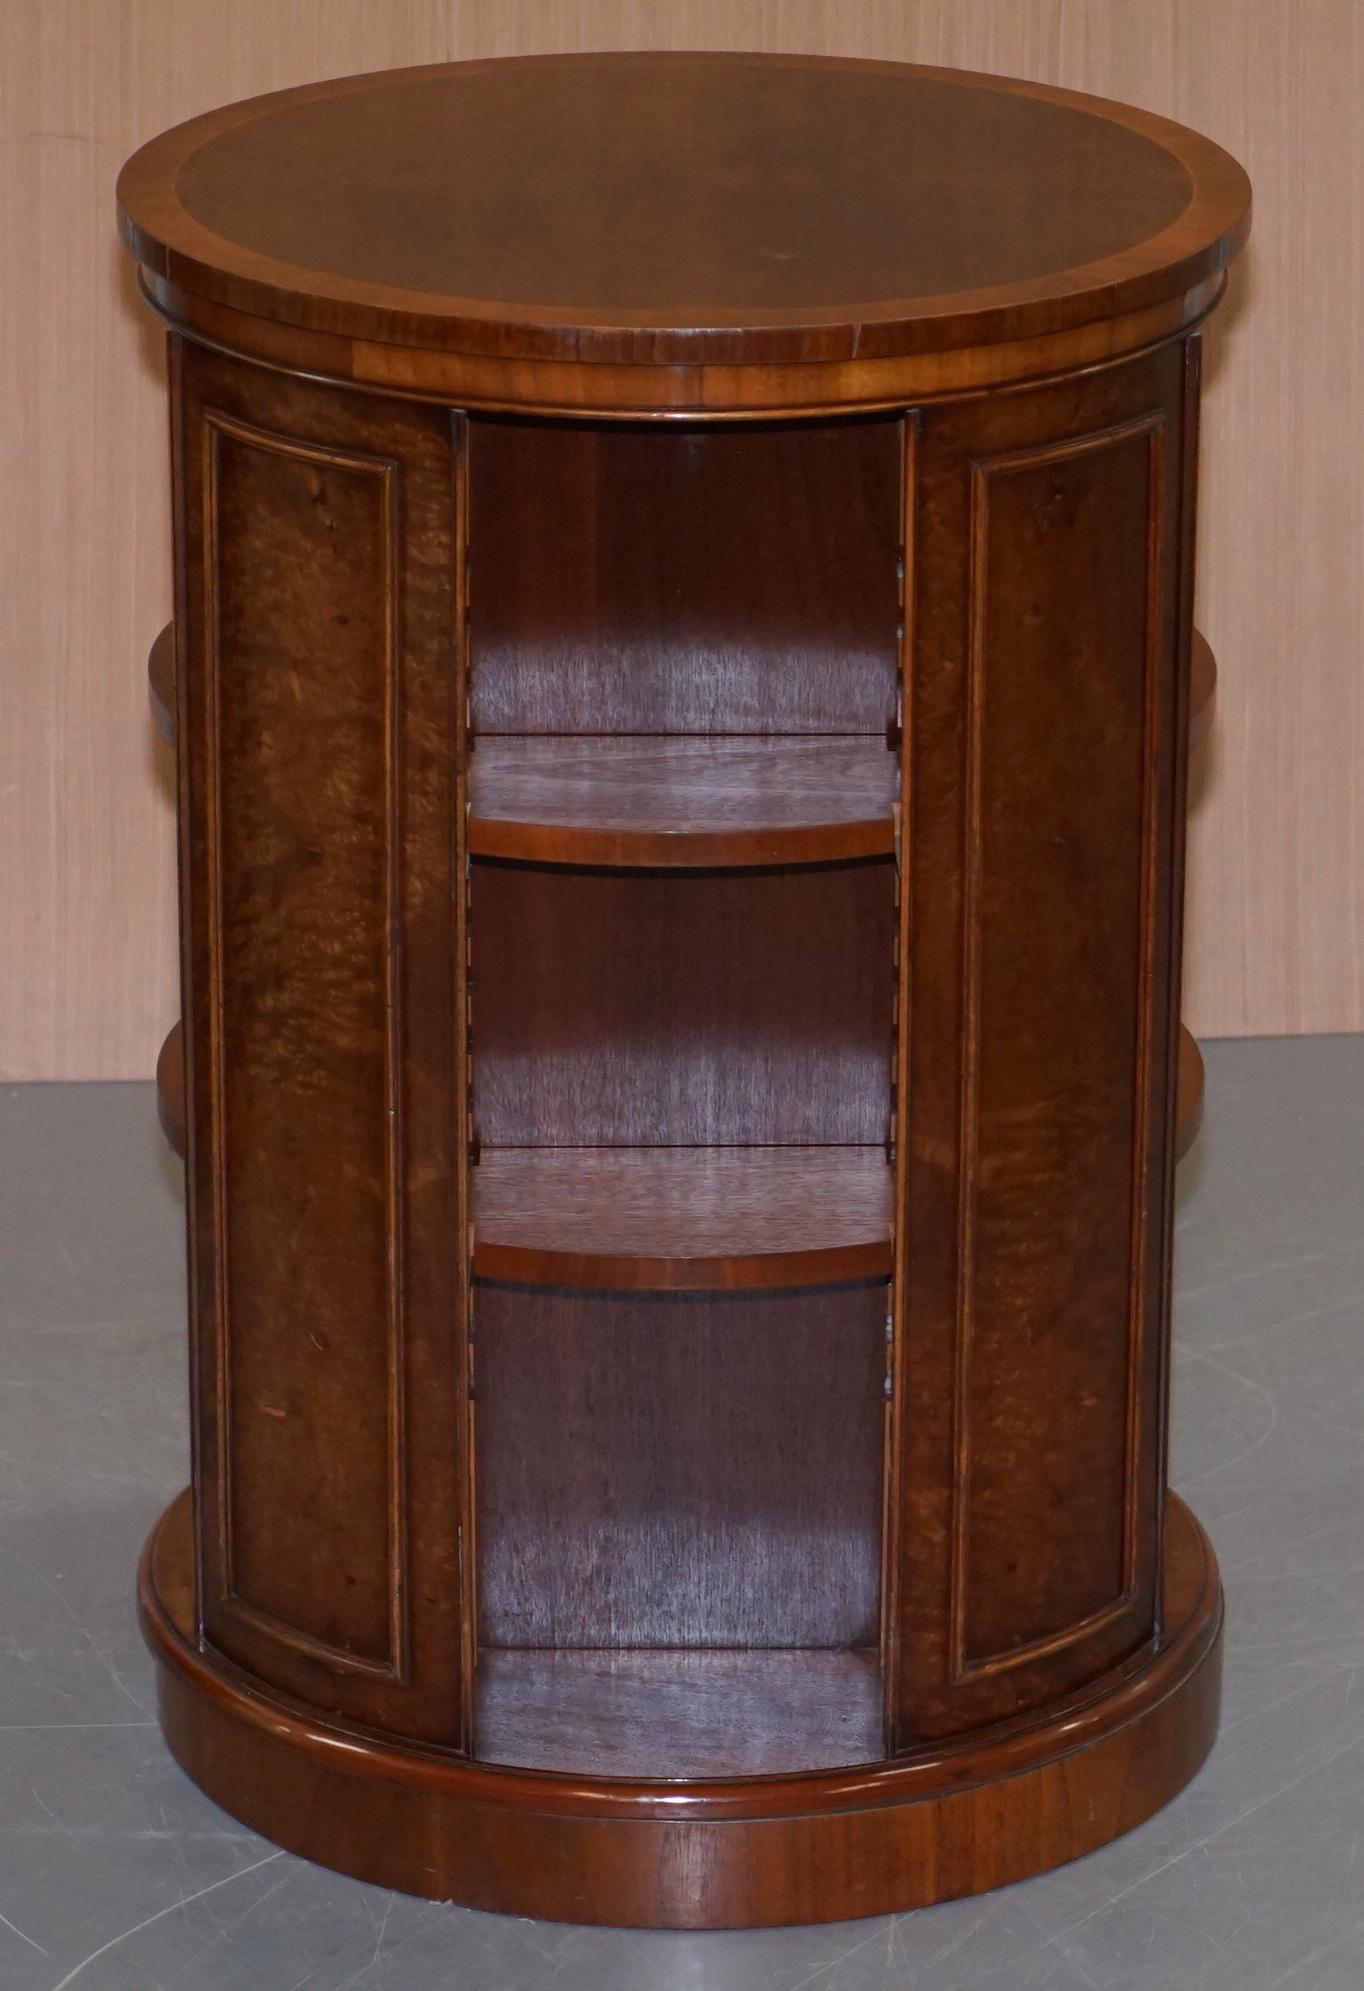 We are delighted to offer for sale this absolutely stunning pair of matching burr walnut revolving bookcases with height adjustable shelves

A very good looking and well made pair, they revolve nice and smoothly, all the shelves can be removed or